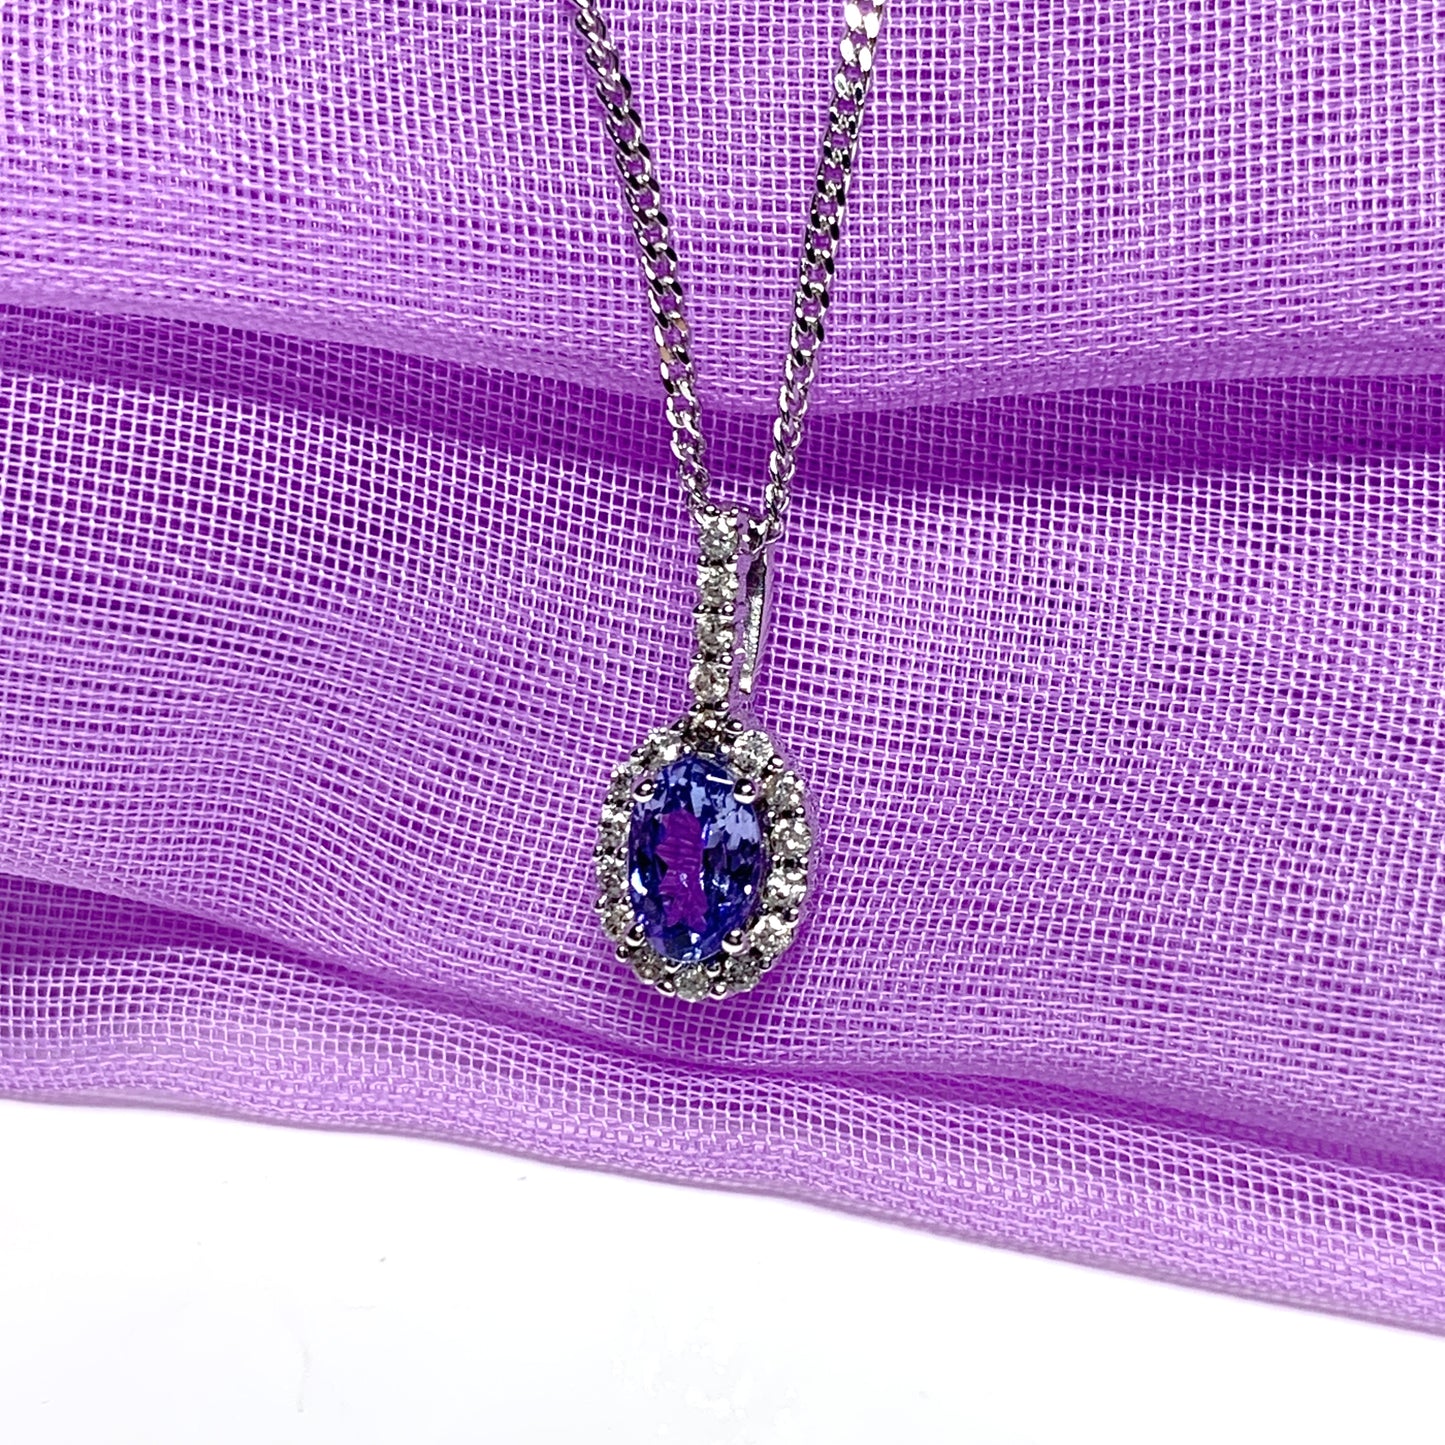 Real tanzanite and diamond white gold oval cluster necklace